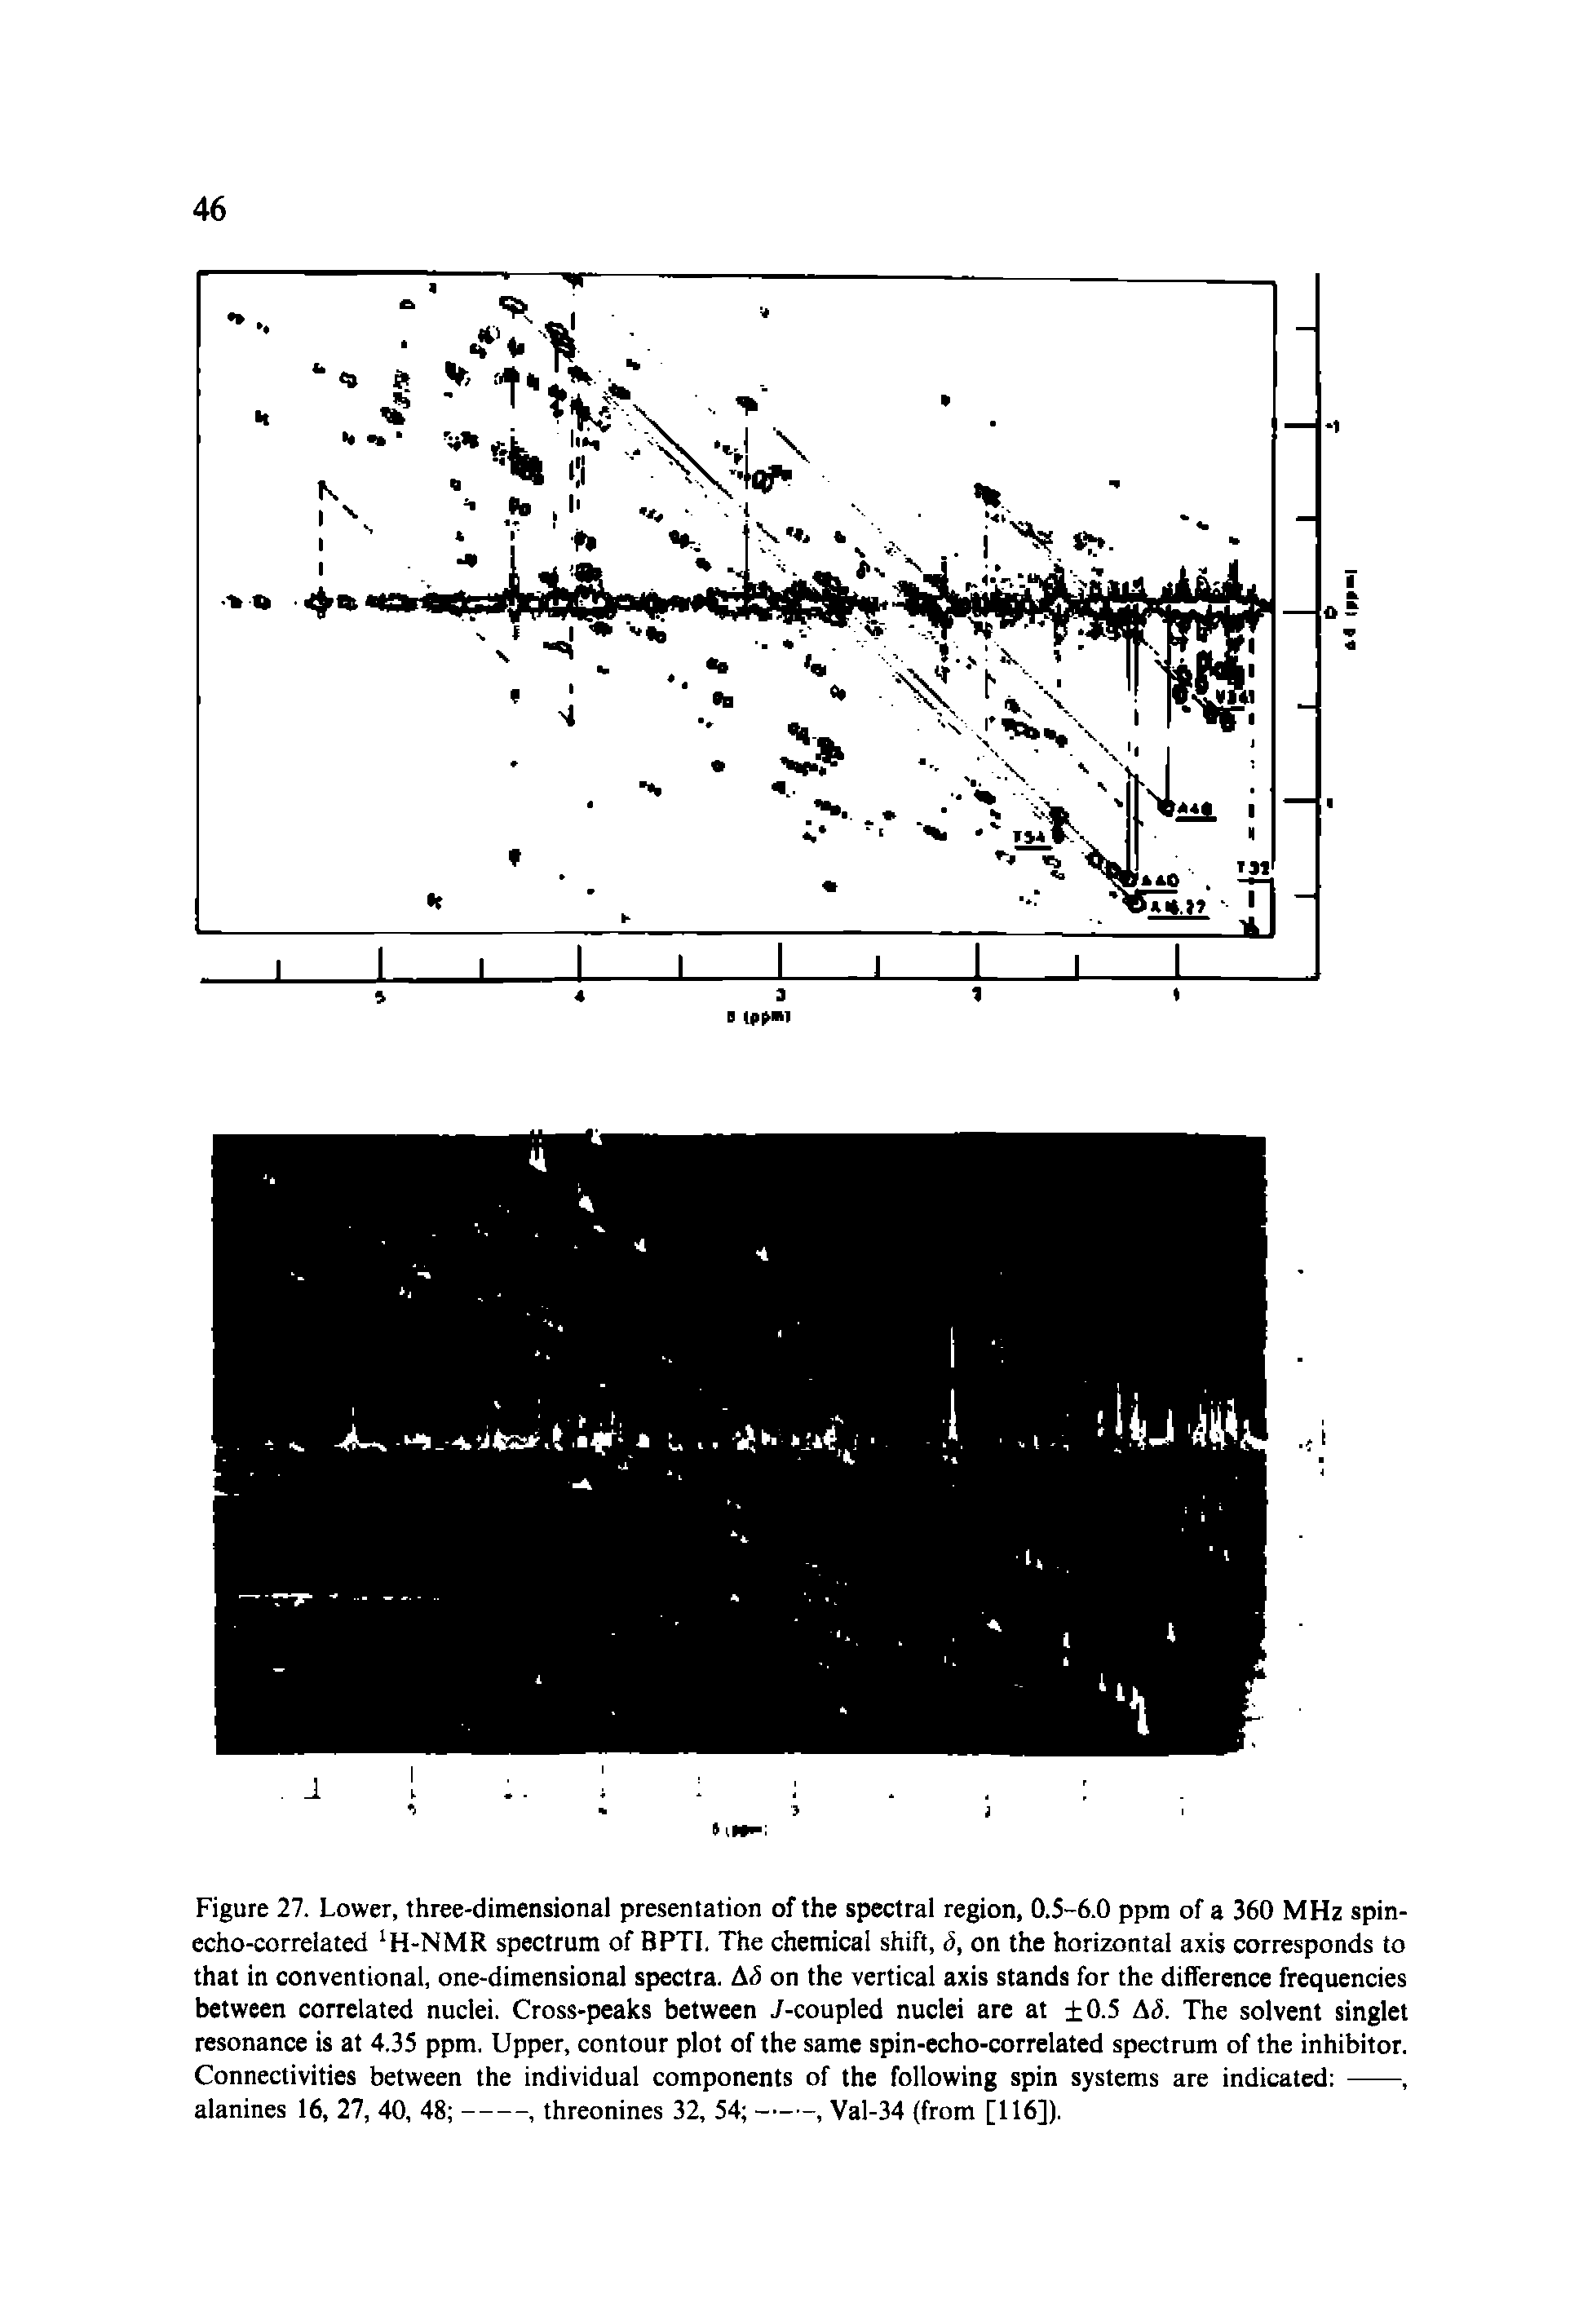 Figure 27. Lower, three-dimensional presentation of the spectral region, 0.5-6.0 ppm of a 360 MHz spin-echo-correlated H-NMR spectrum of BPTI. The chemical shift, 5, on the horizontal axis corresponds to that in conventional, one-dimensional spectra. Ad on the vertical axis stands for the difference frequencies between correlated nuclei. Cross-peaks between J-coupled nuclei are at 0.5 Ad. The solvent singlet resonance is at 4.35 ppm. Upper, contour plot of the same spin-echo-correlated spectrum of the inhibitor.